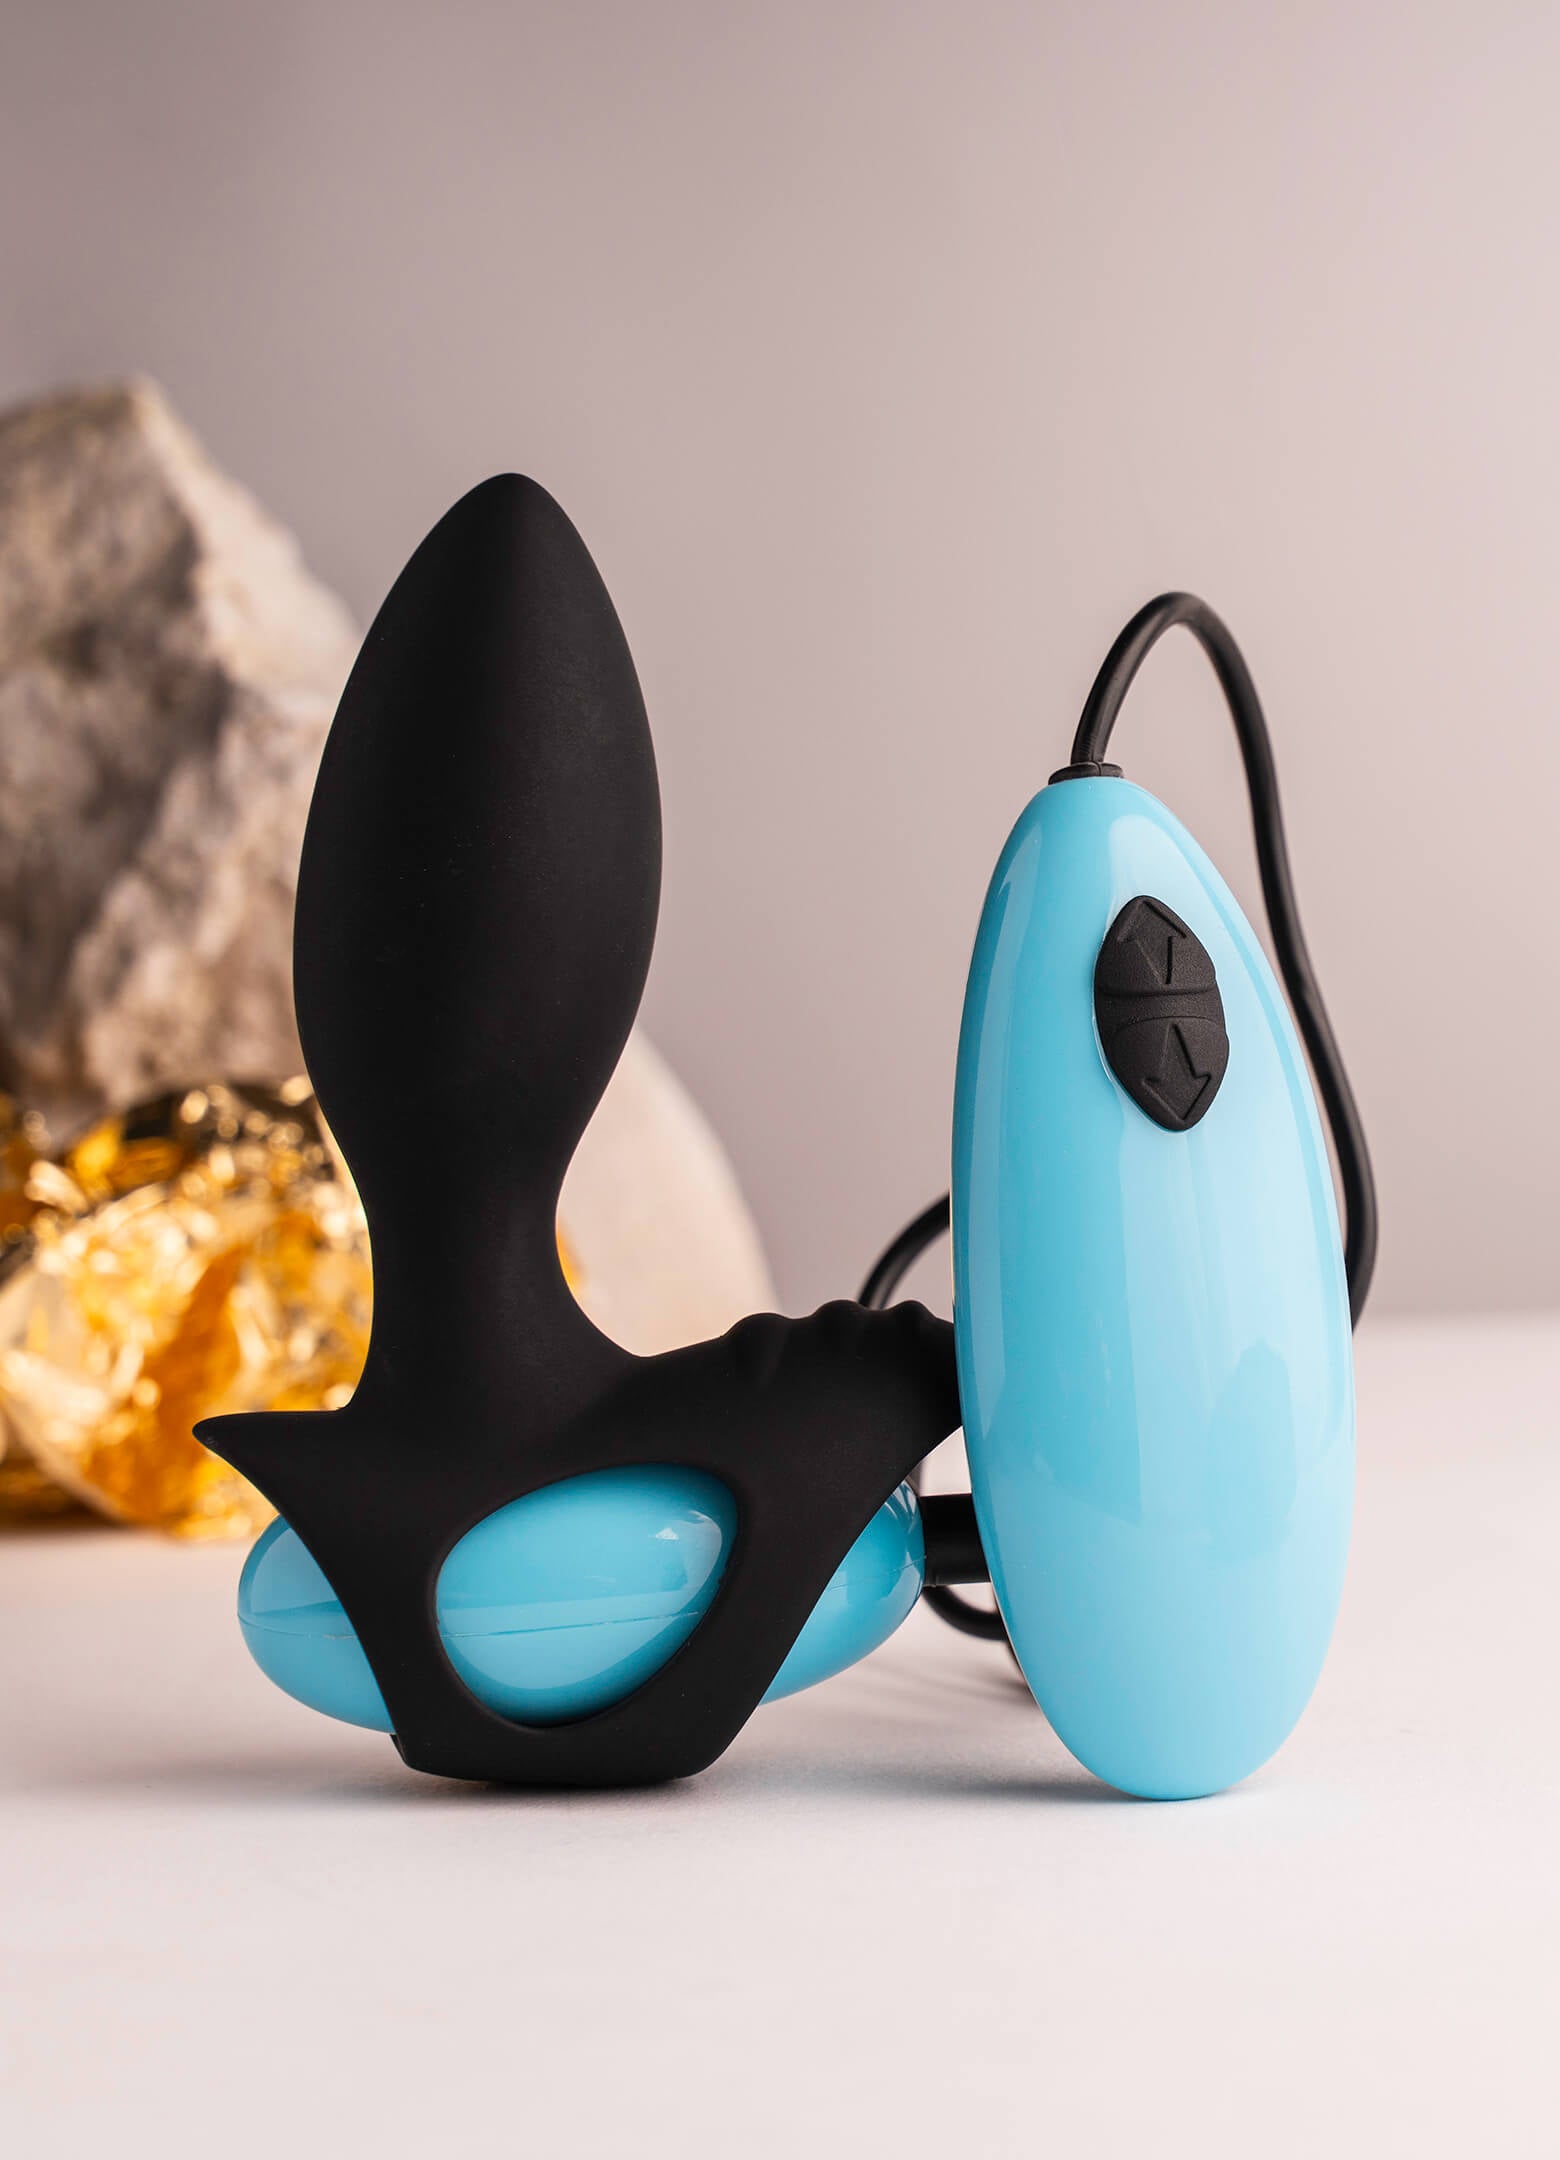 Black and blue remote controlled butt plug with perineum stimulation point.